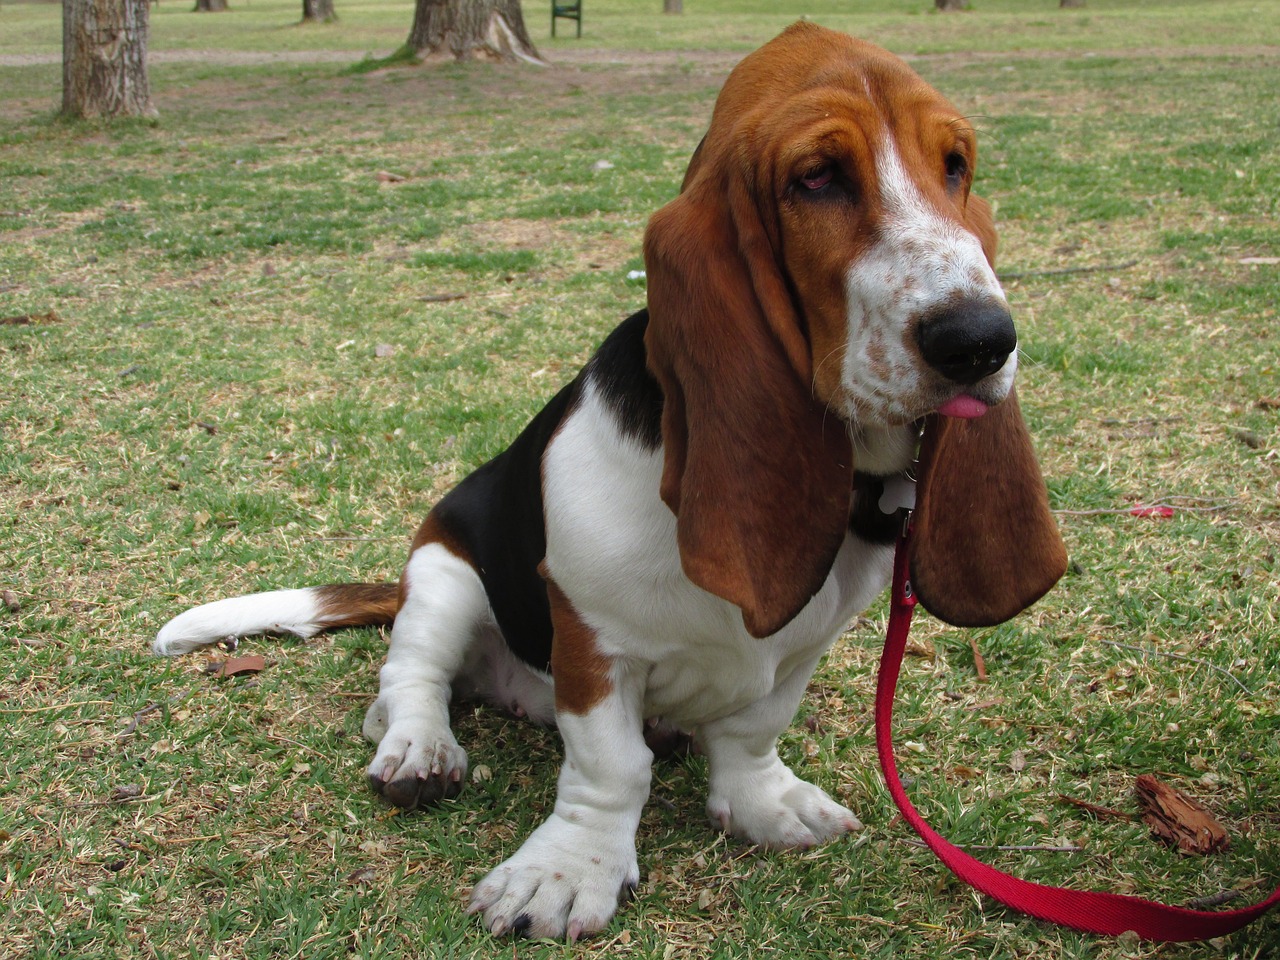 10 Hilarious Things Only a Basset Hound Owner Would Understand